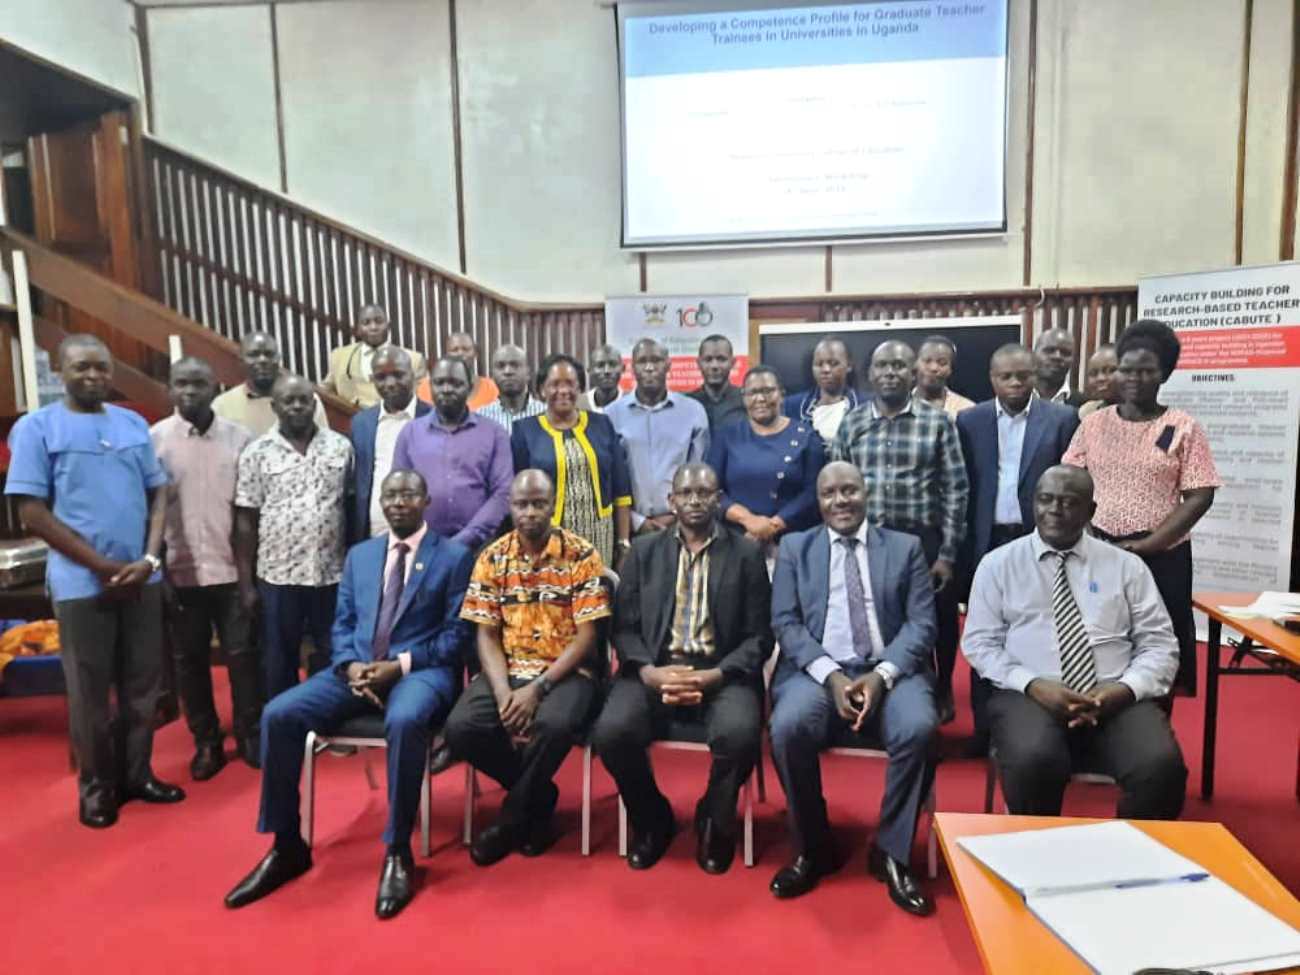 Prof. Fred Masagazi Masaazi (Front Row, Second from Right) with stakeholders during the engagement in the AVU Conference Room, CEES, Makerere University.